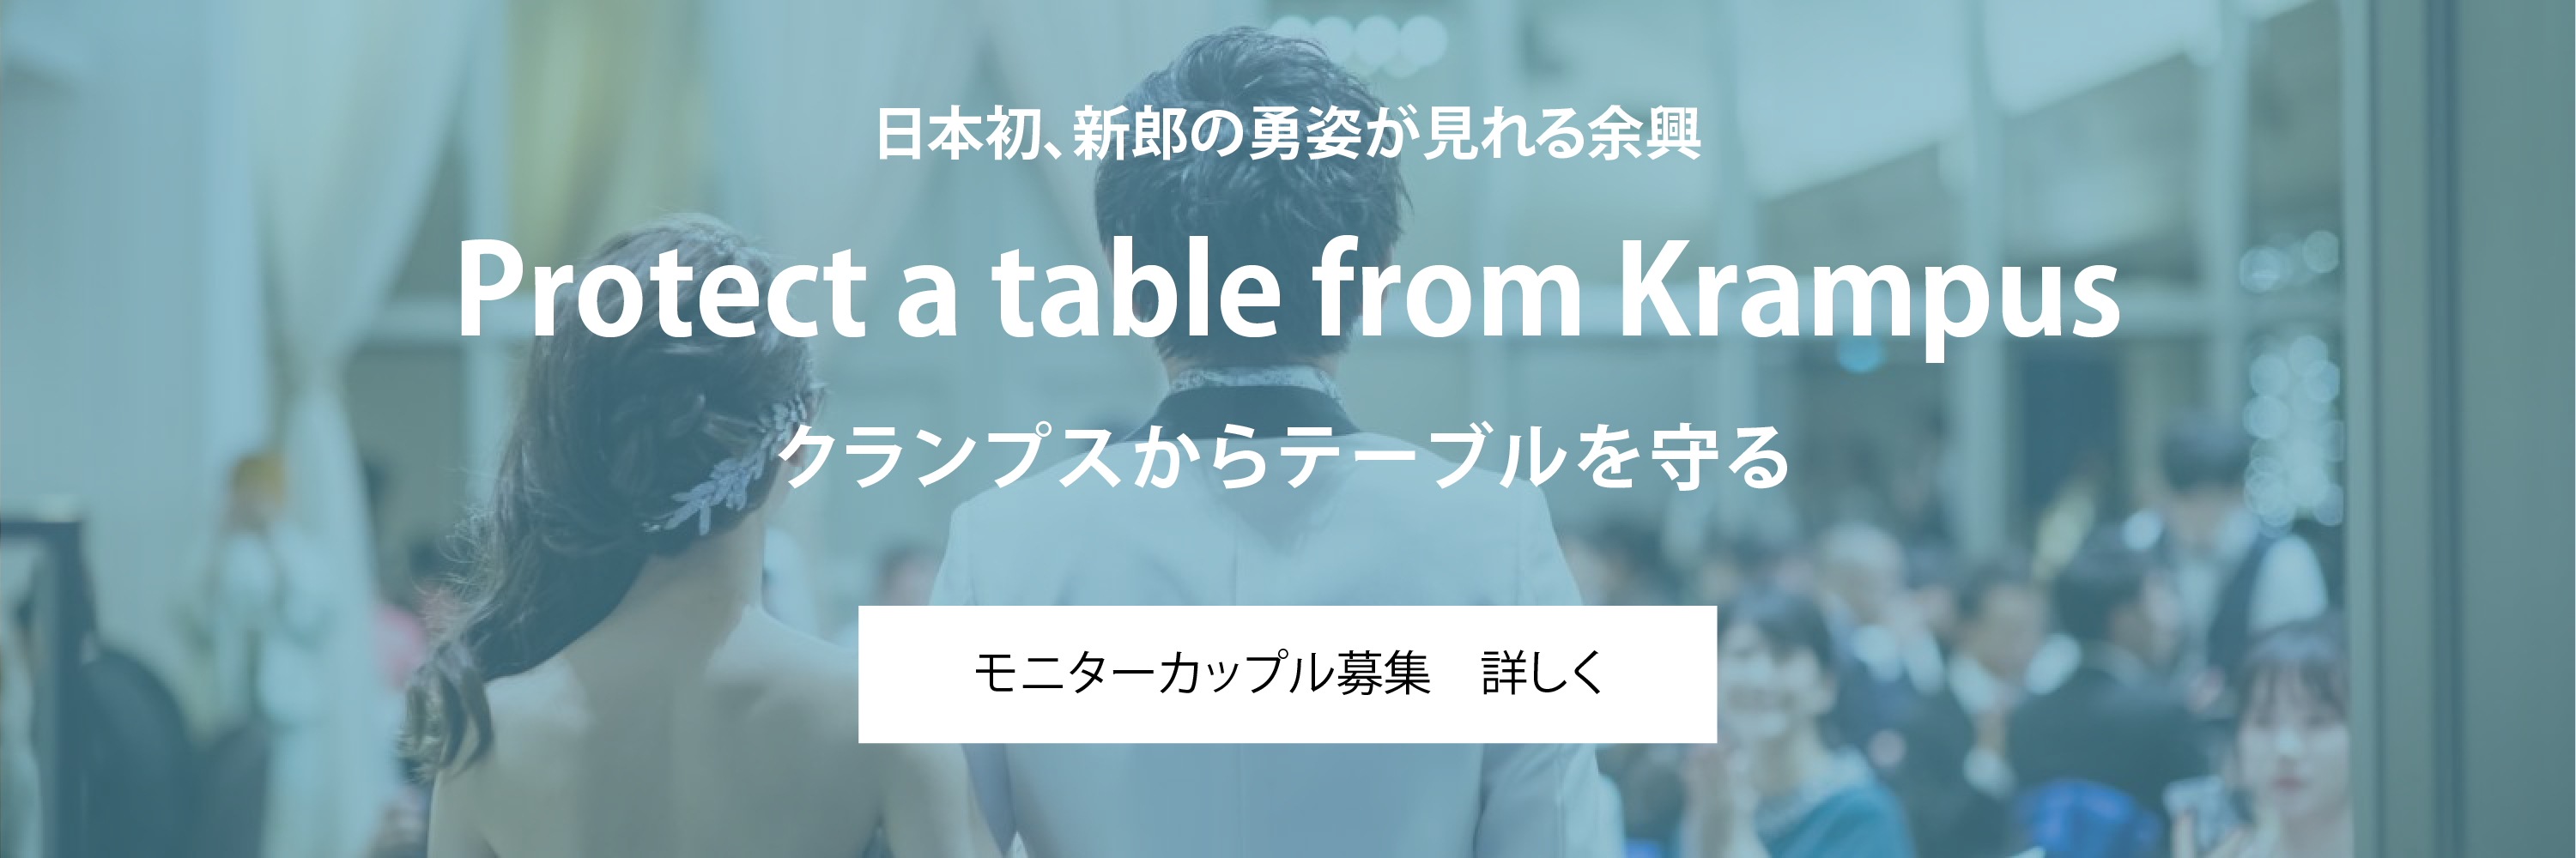 Protect a table from Krampus　モニターカップル募集